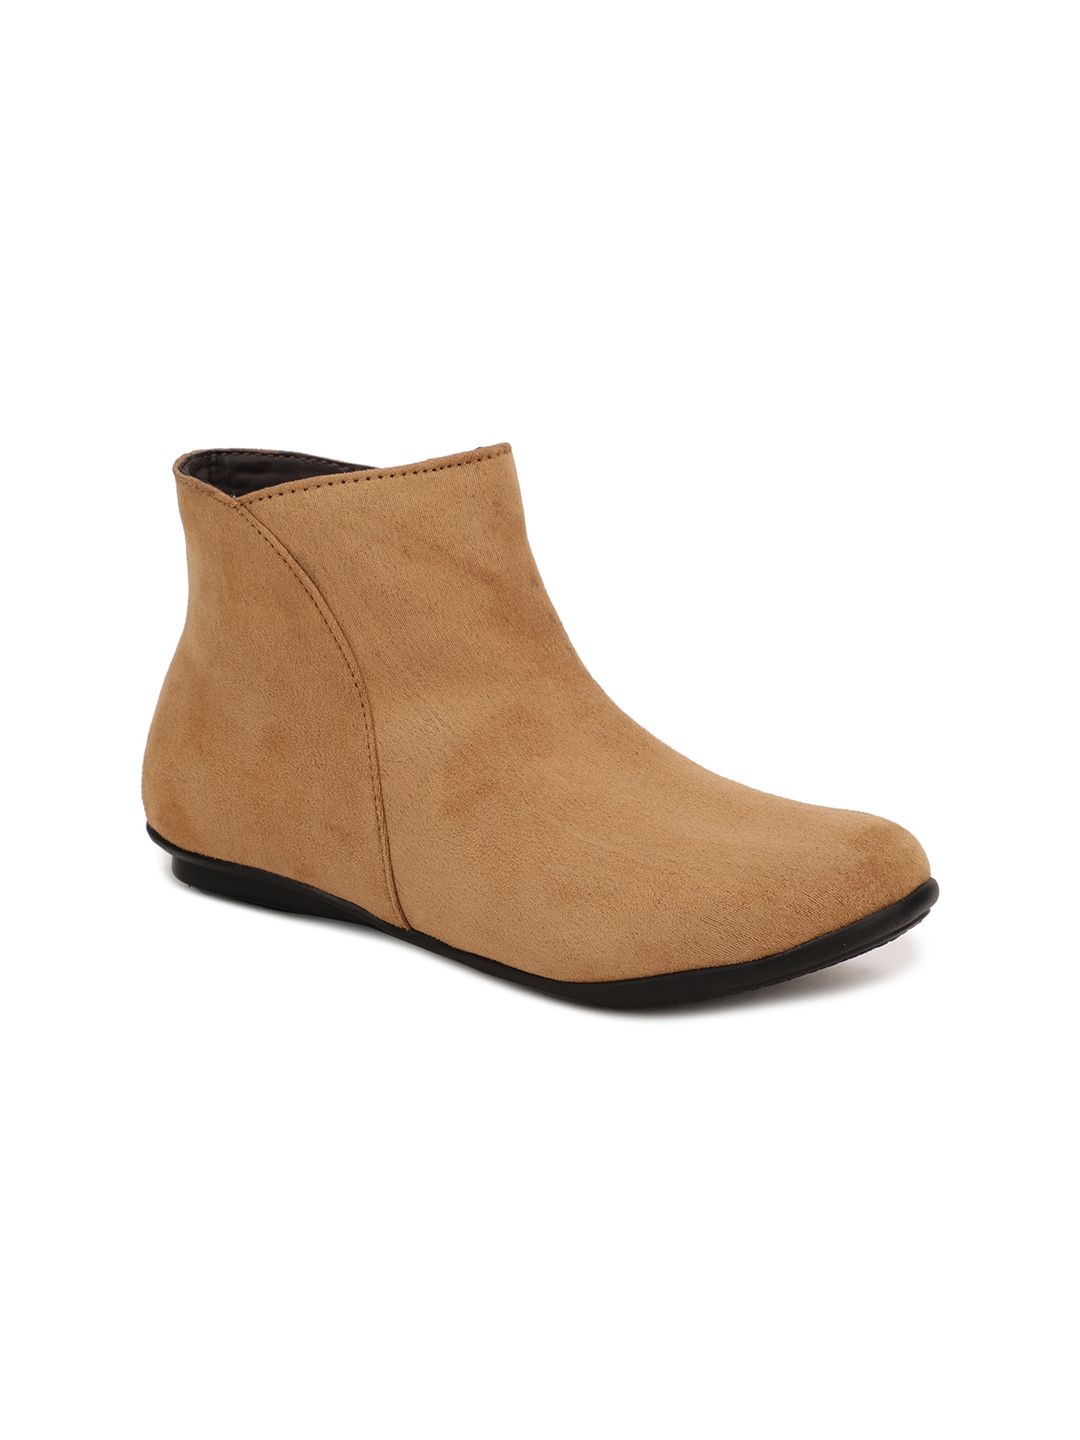 Bruno Manetti Women Beige Suede Flat Boots Price in India